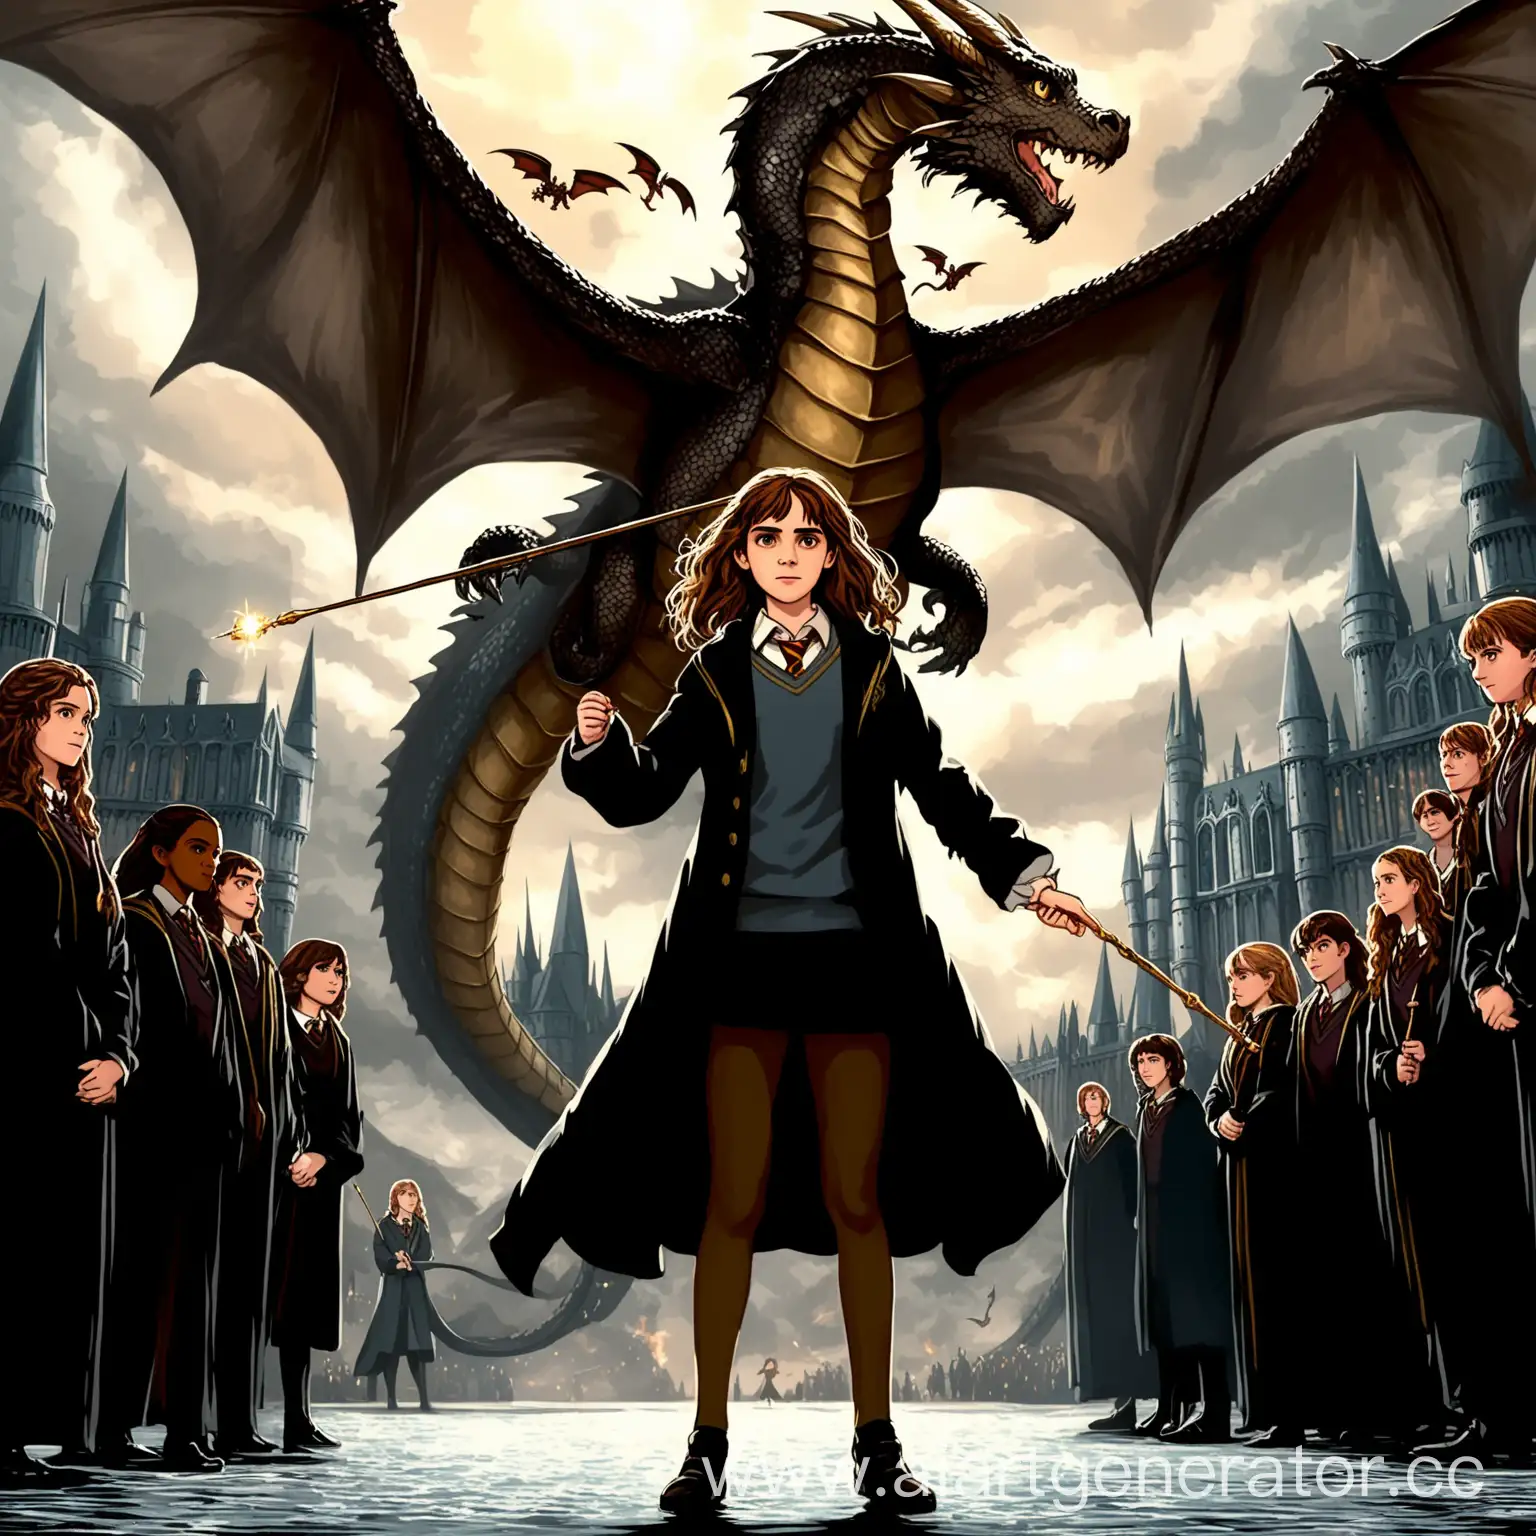 Courageous-Hermione-Wielding-Wand-Against-Flying-Dragon